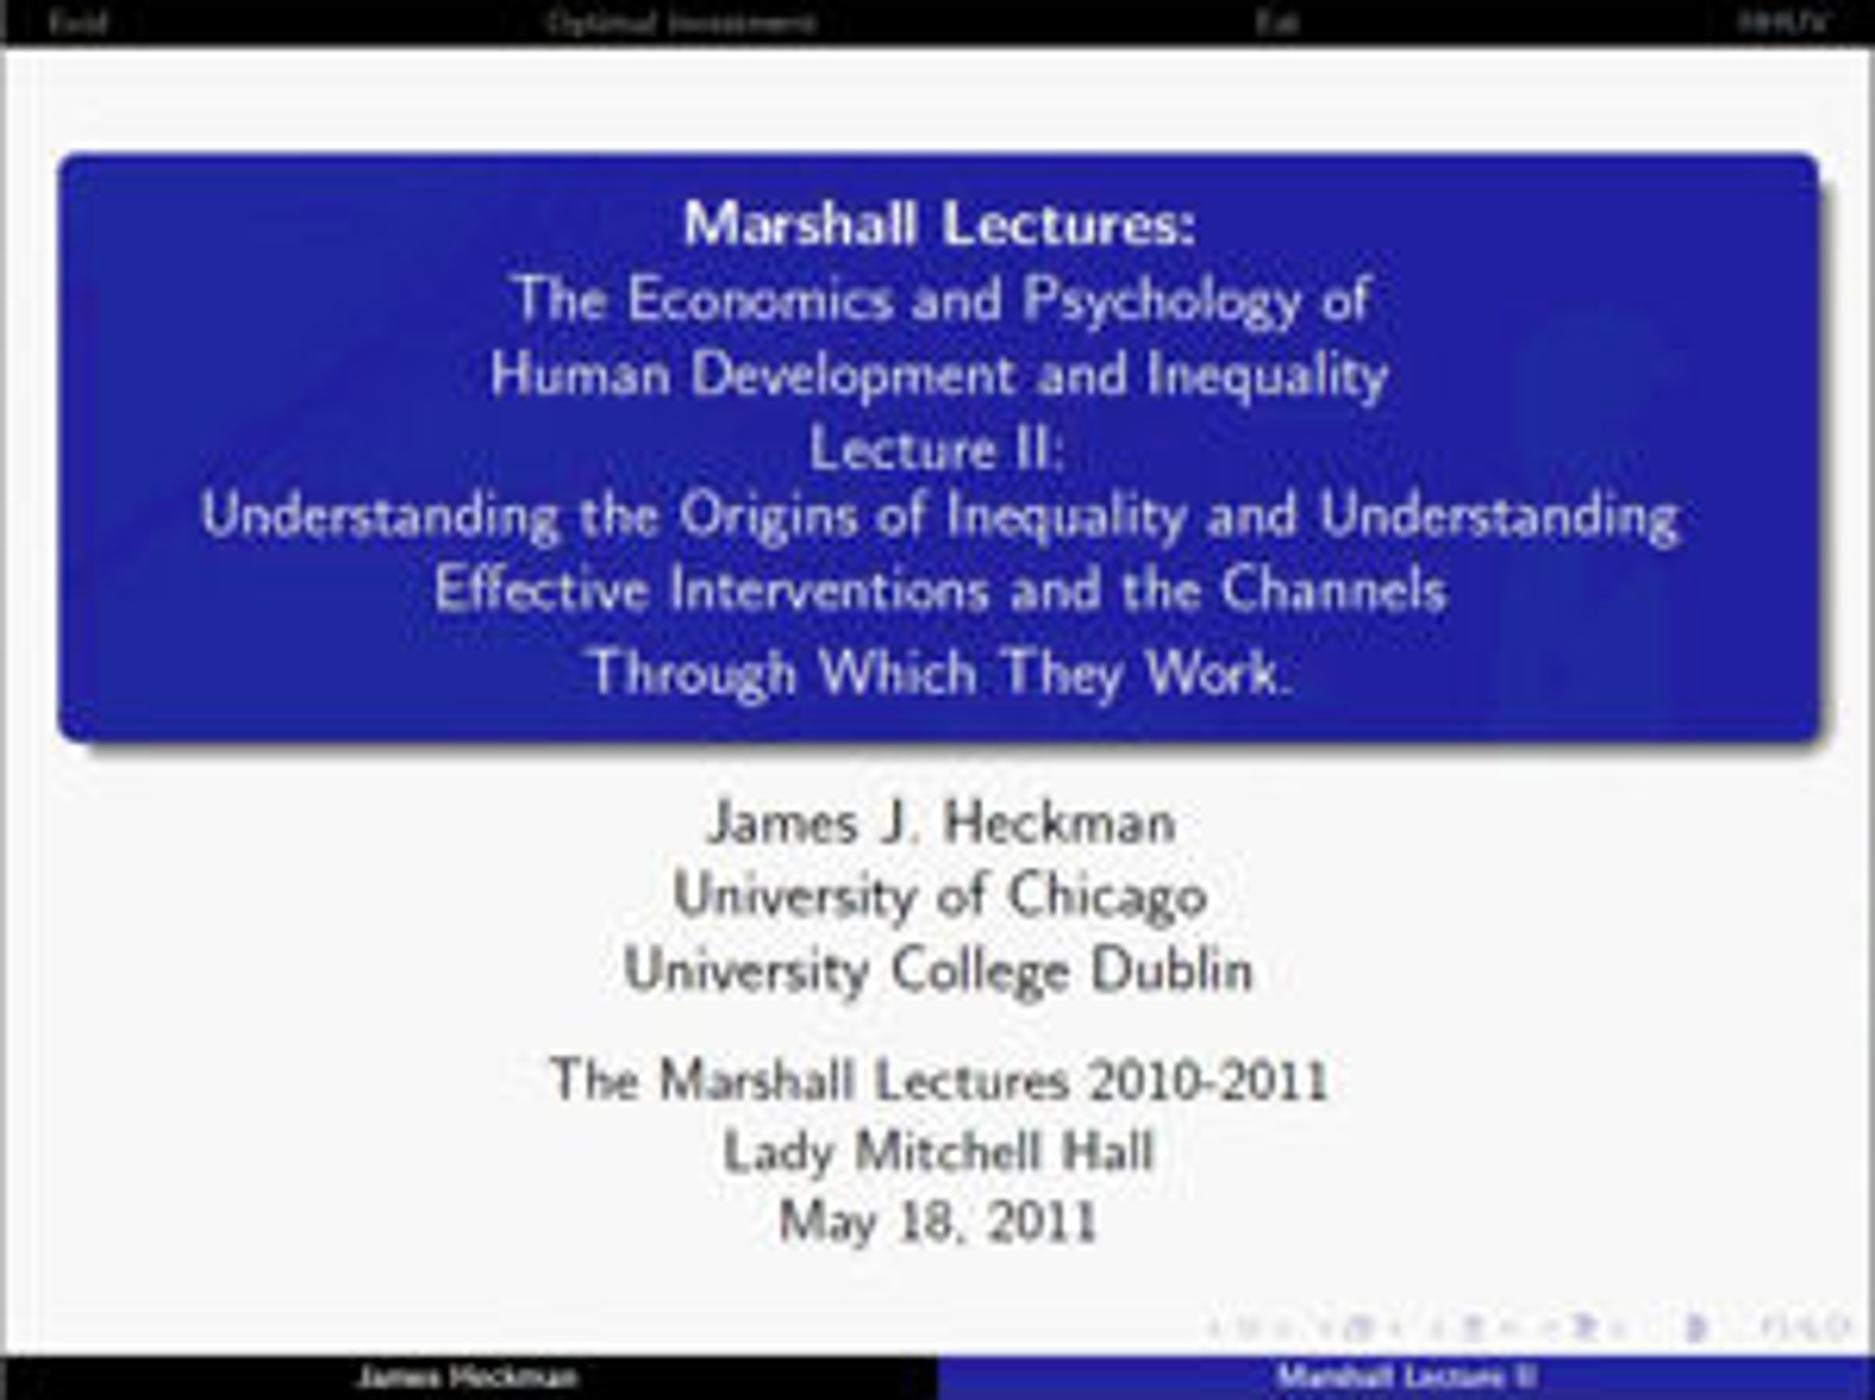 Marshall Lecture 2010-2011 - Professor James Heckman - The economics and psychology of human development and inequality - Lecture 2